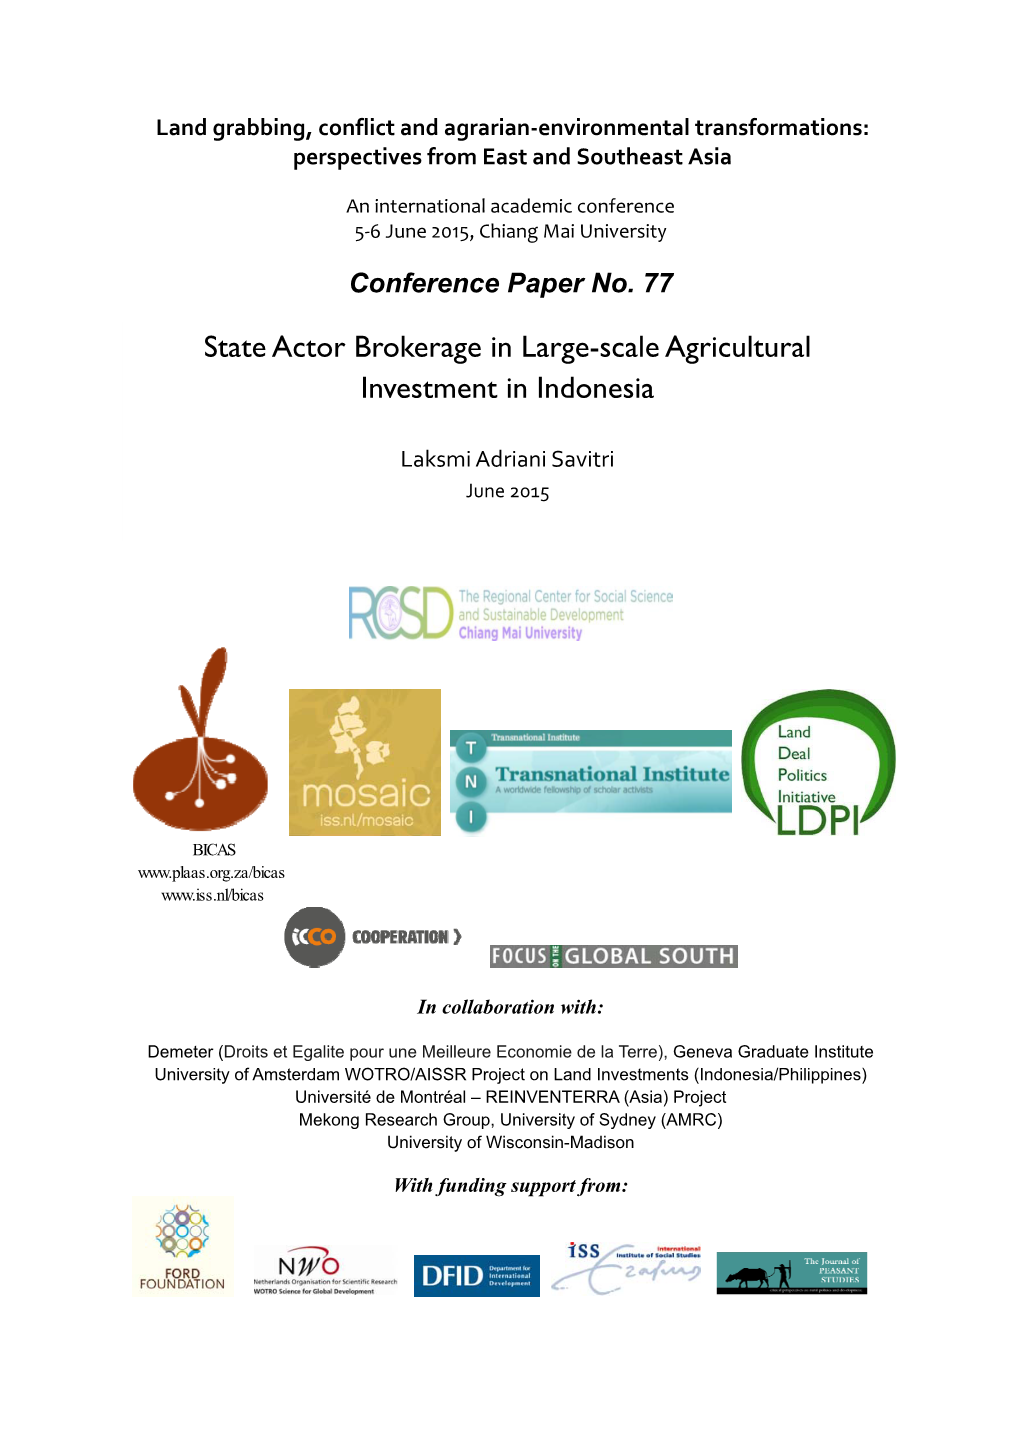 State Actor Brokerage in Large-Scale Agricultural Investment in Indonesia